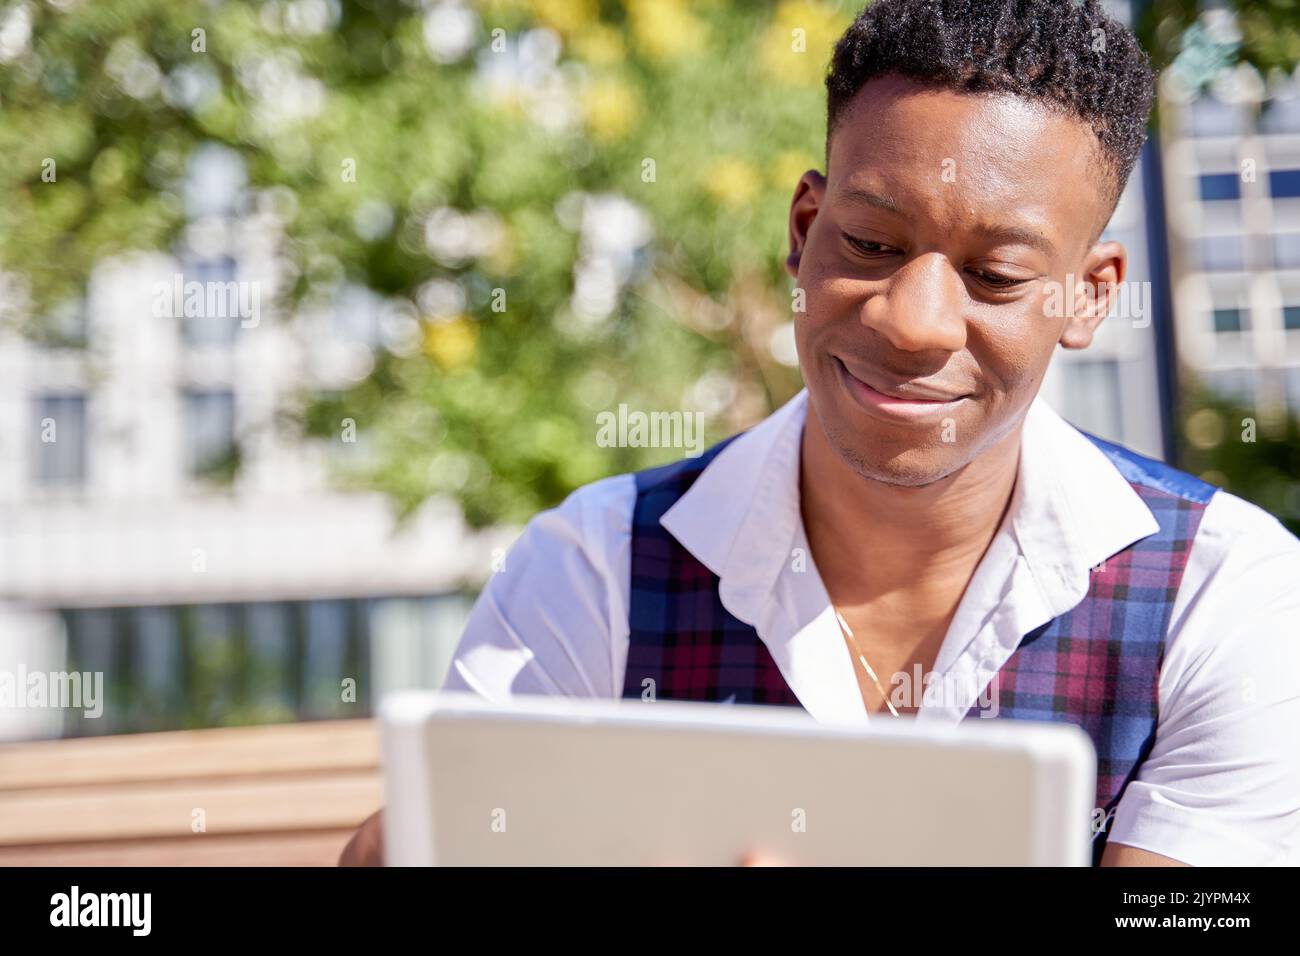 close-up of an African-American juvenile using his tablet pc Stock Photo